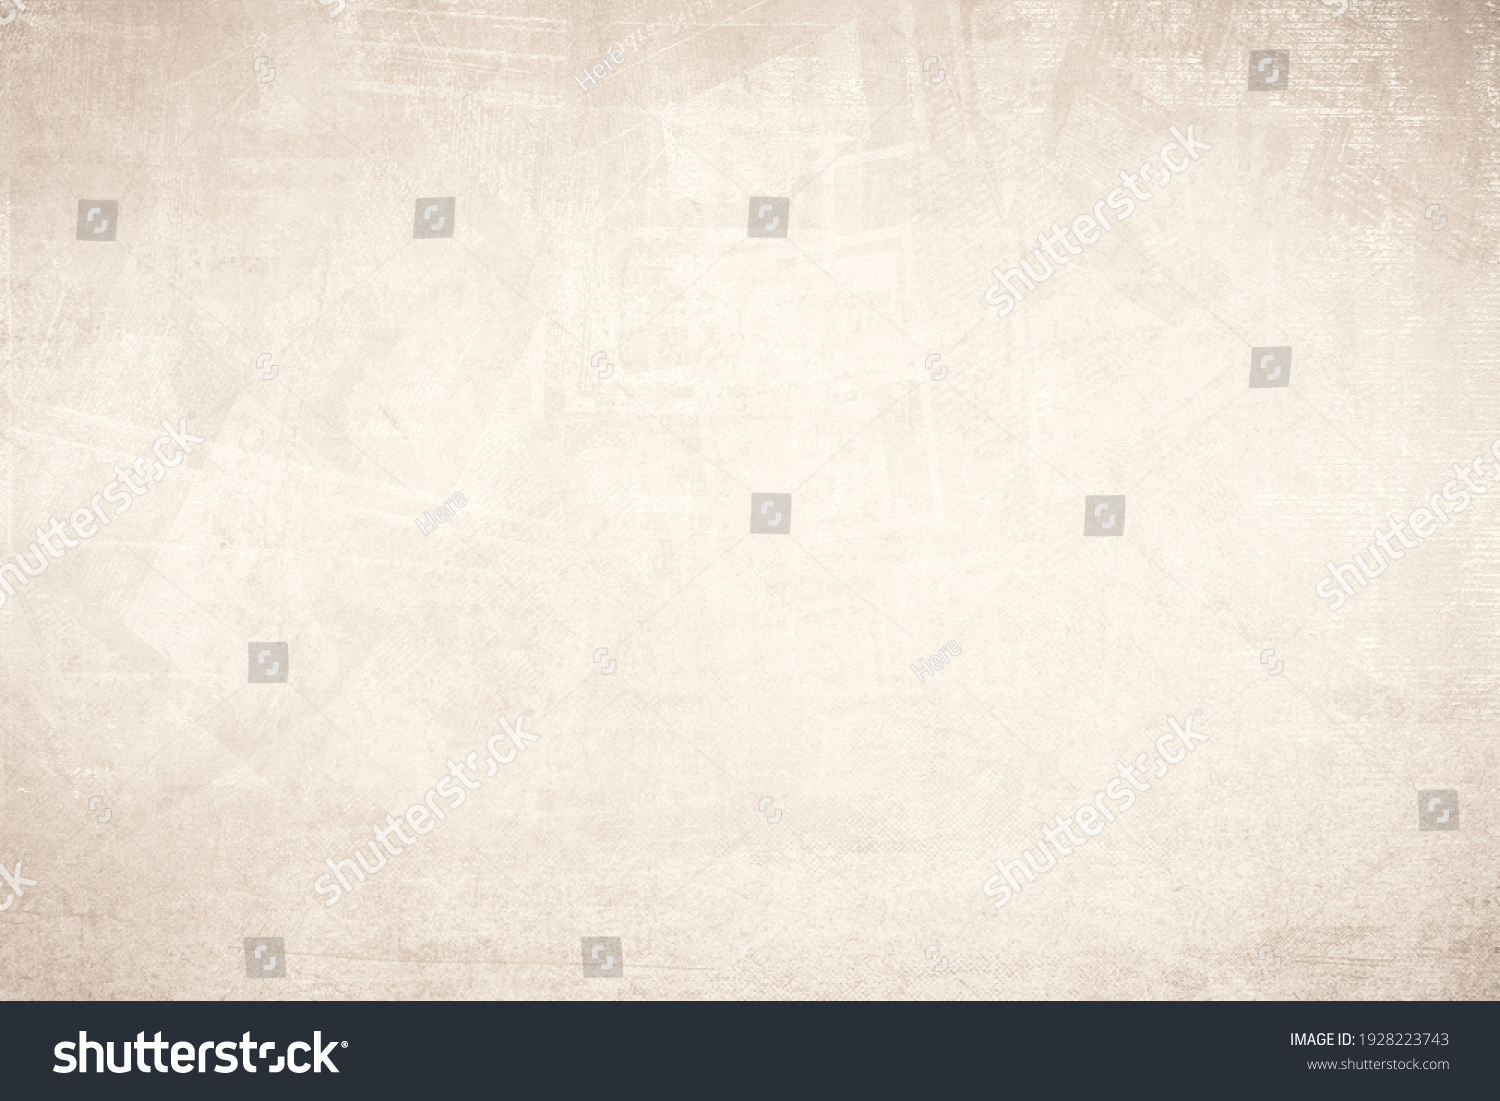 OLD NEWSPAPER BACKGROUND, BLANK BROWN VINTAGE GRUNGE PAPER TEXTURE, TEXTURED NEWSPRINT PATTERN WITH SPACE FOR TEXT, WALLPAPER DESIGN #1928223743